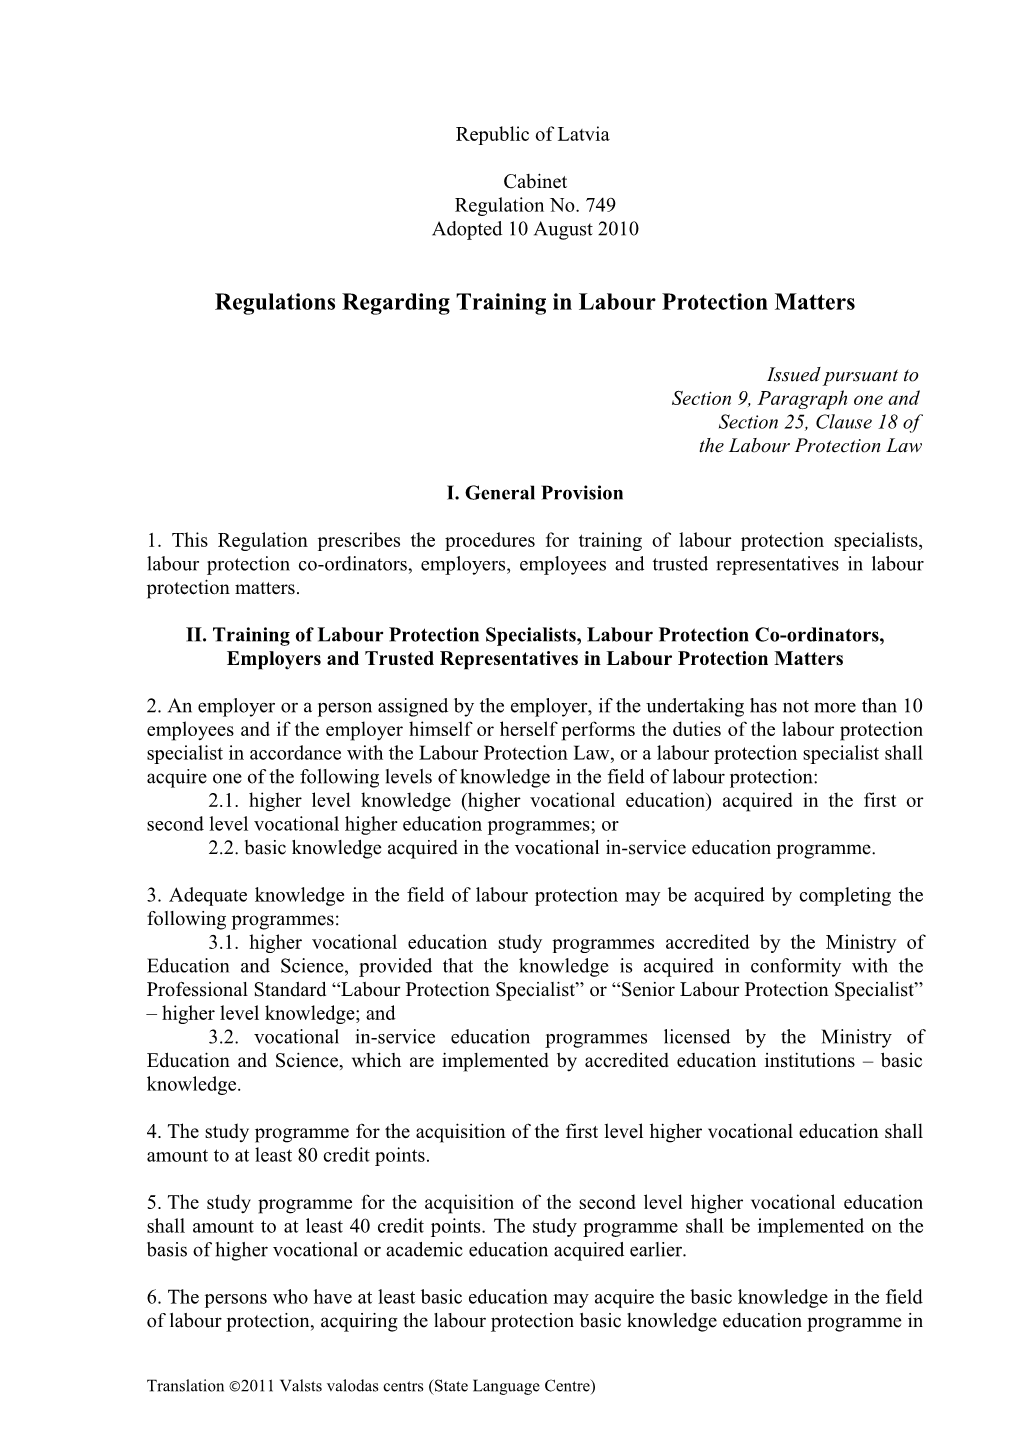 Regulations Regarding Training in Labour Protection Matters